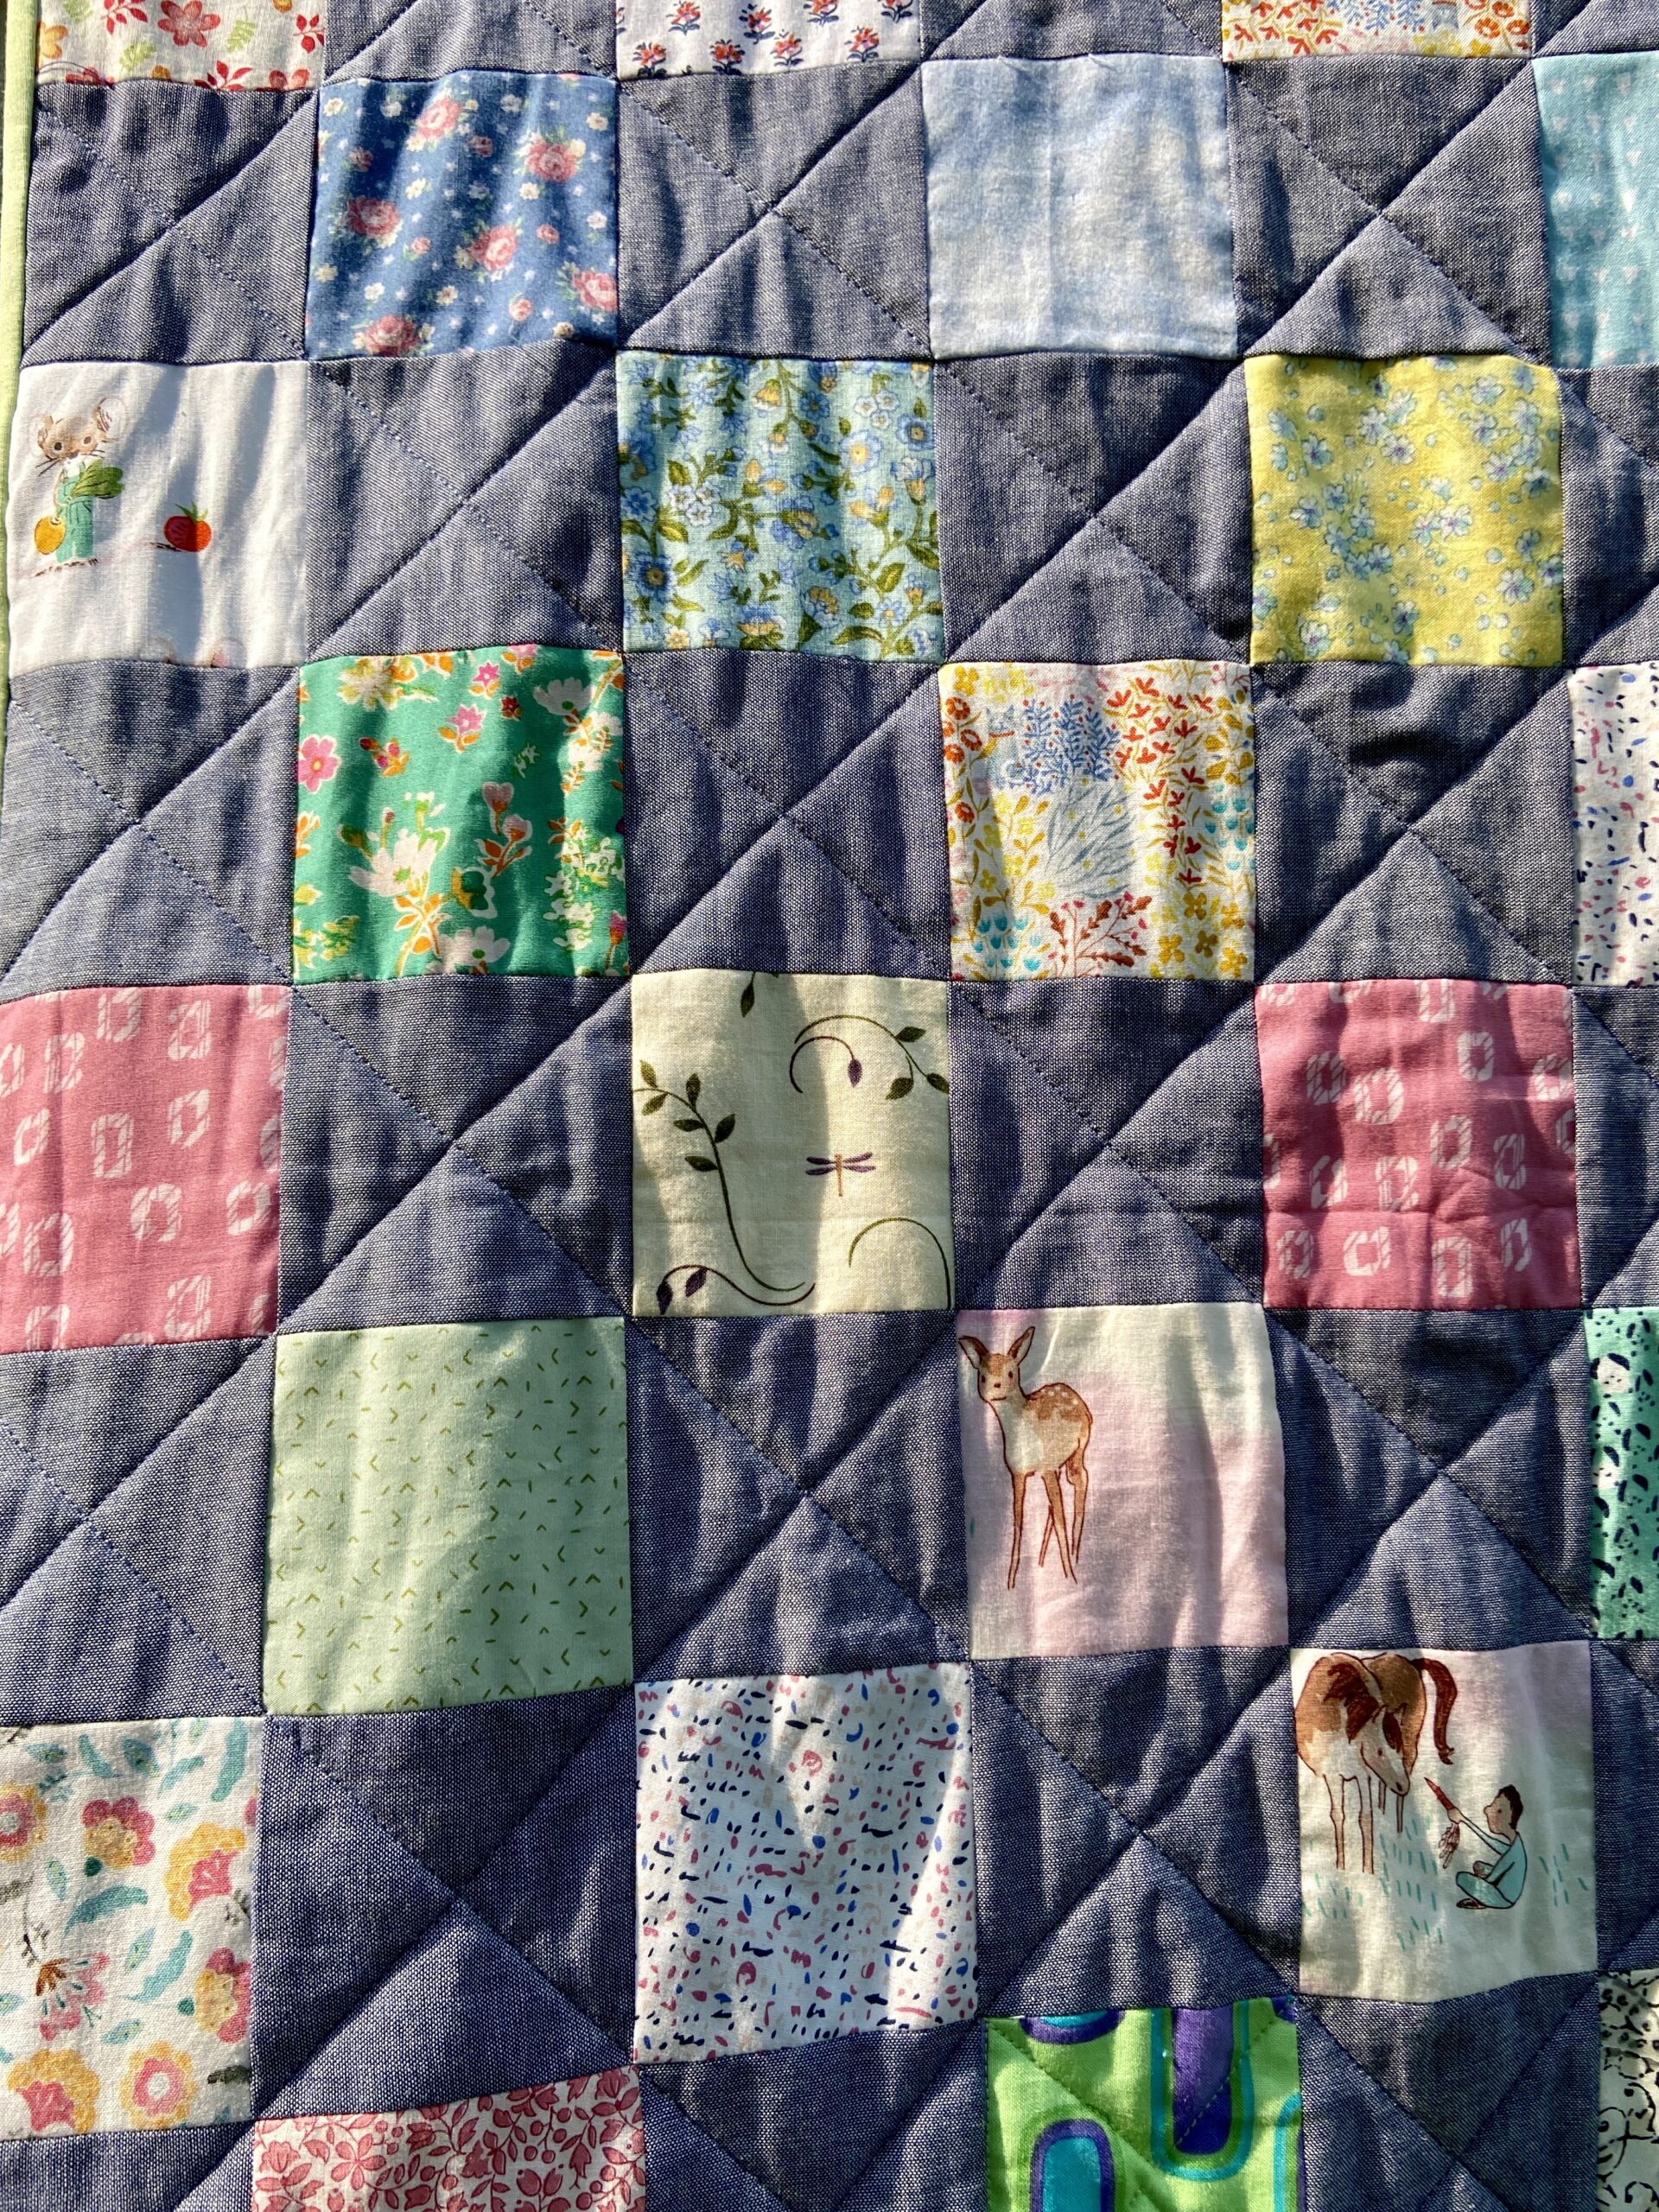 The Stitch TV Show  Quilting chat with friends and a healthy dose